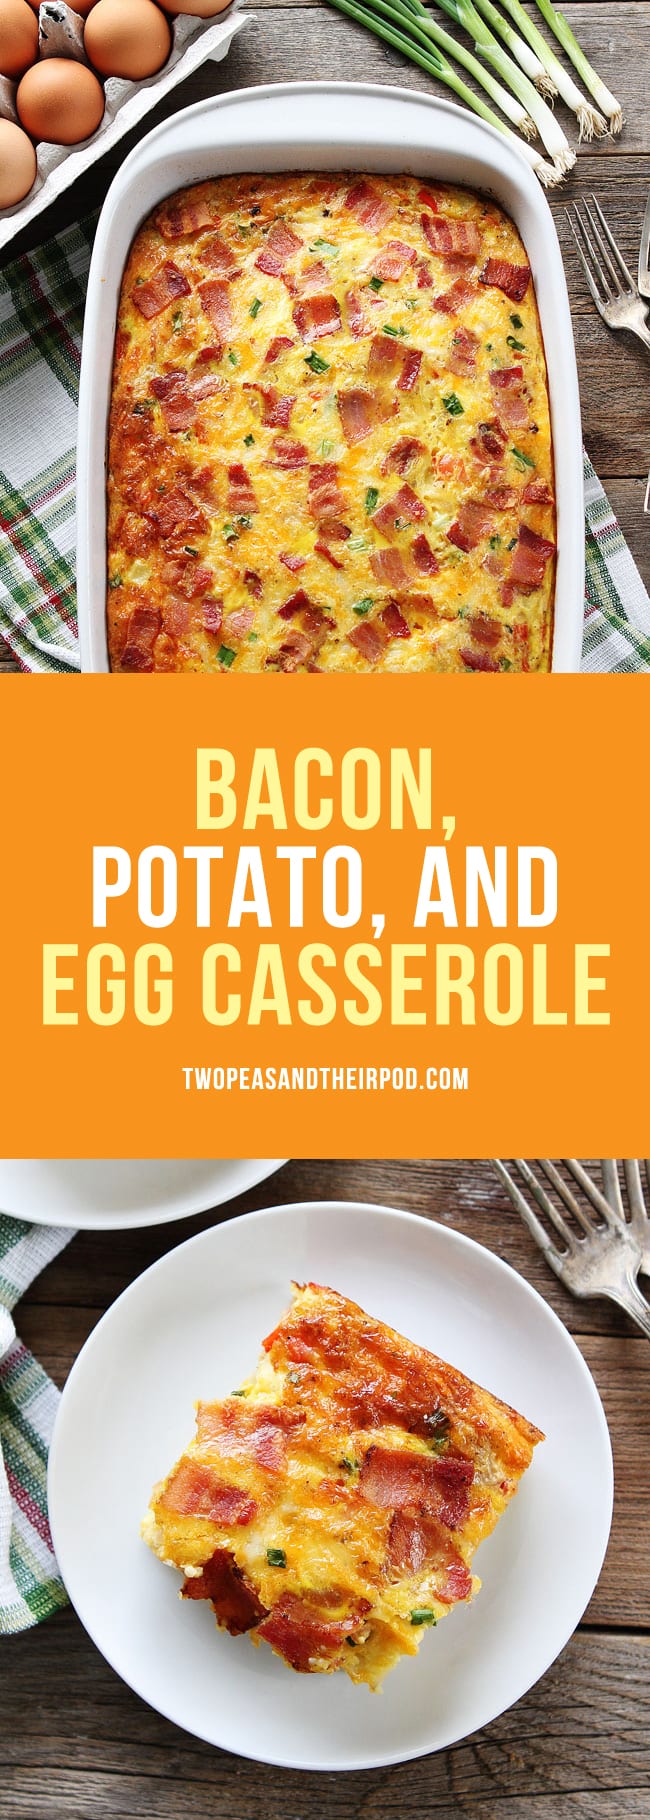 Bacon Potato, and Egg Casserole-this easy breakfast casserole is packed with bacon, potatoes, and cheese! It can be prepared ahead of time and is a real crowd pleaser! #breakfast #casserole #bacon #holidays #eggs